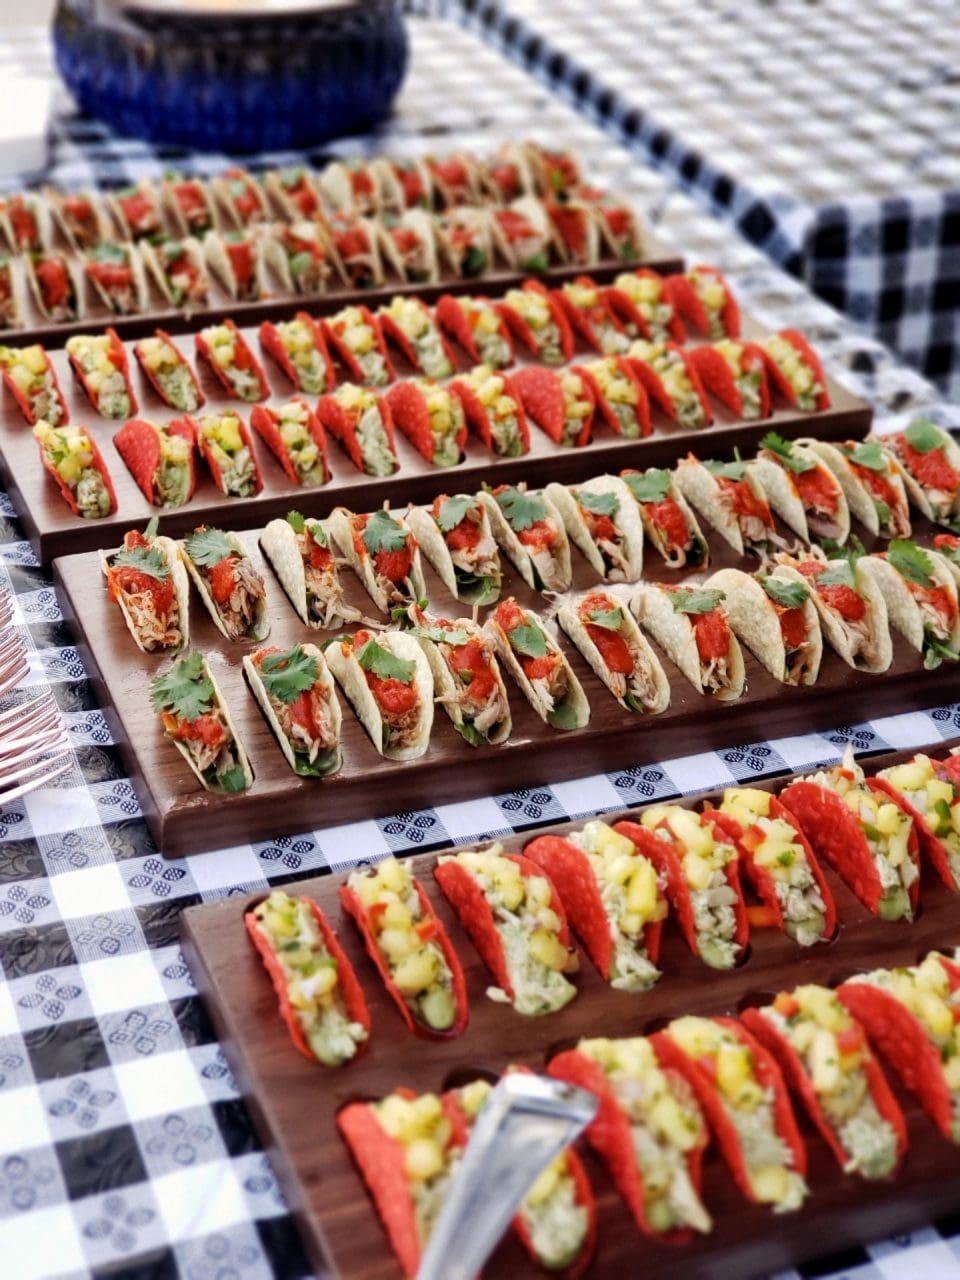 Husker Tacos Catered for Tailgate Event by chef alfaro